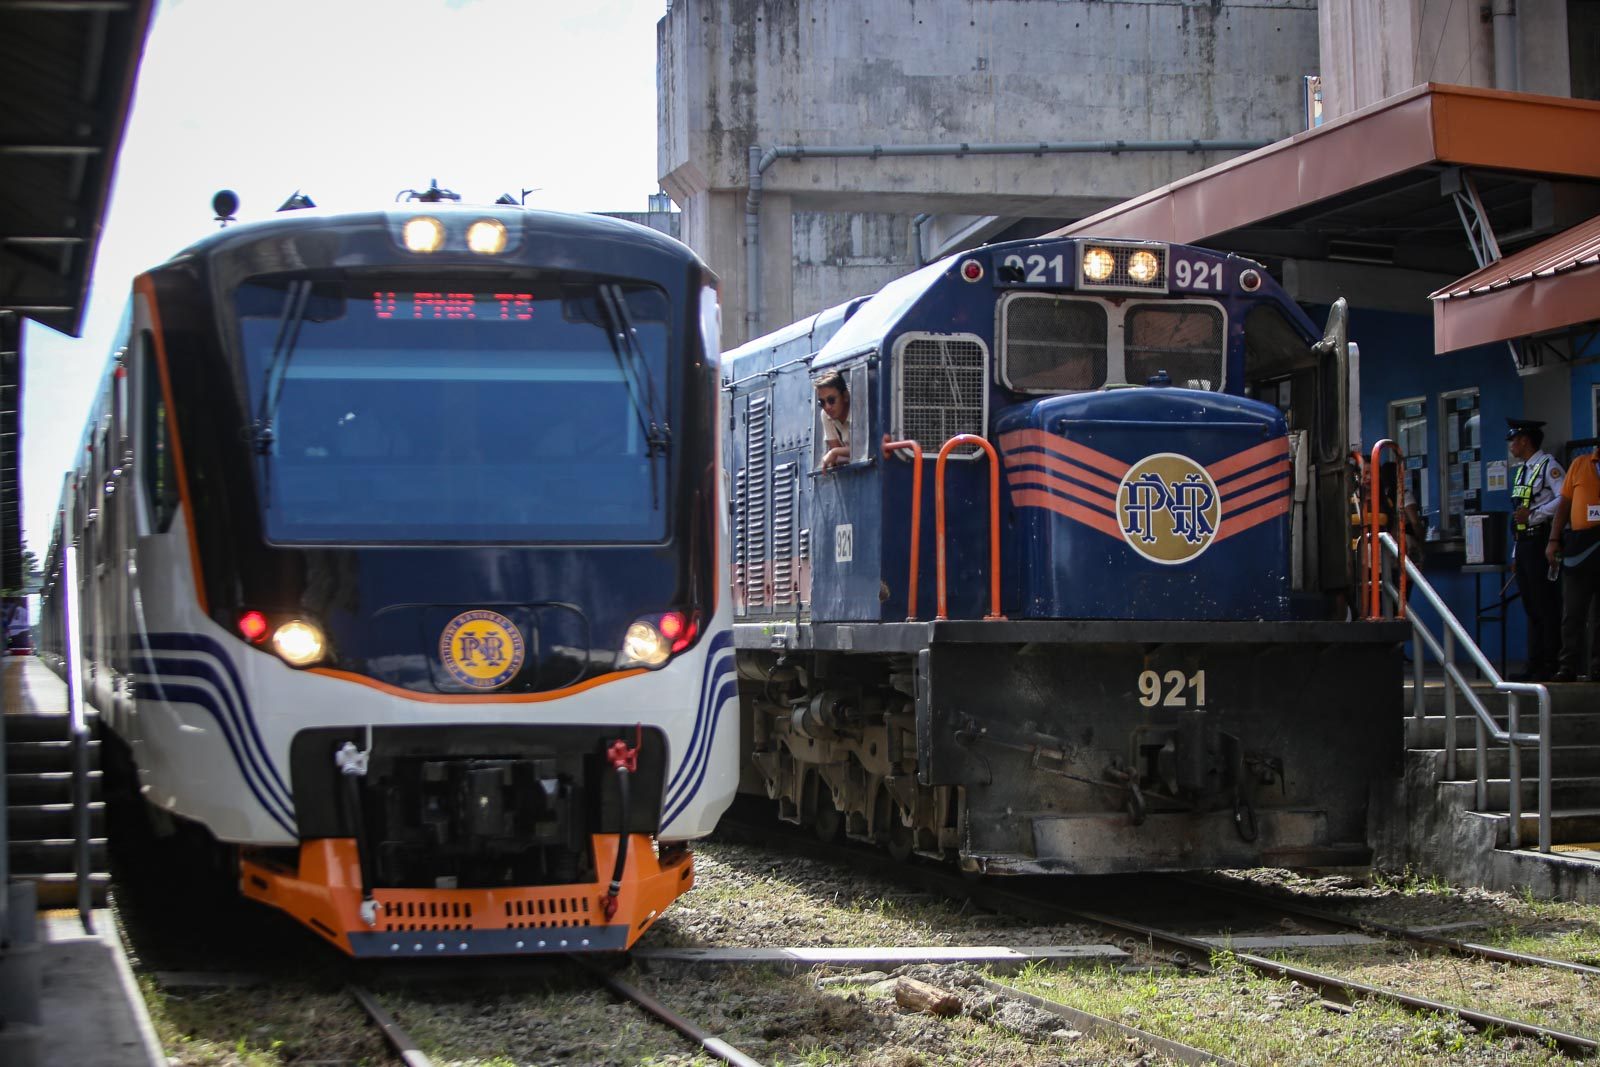 MORE TRAINS COMING. At least 31 more railcars are expected to arrive in 2020. Photo by Ben Nabong/Rappler  